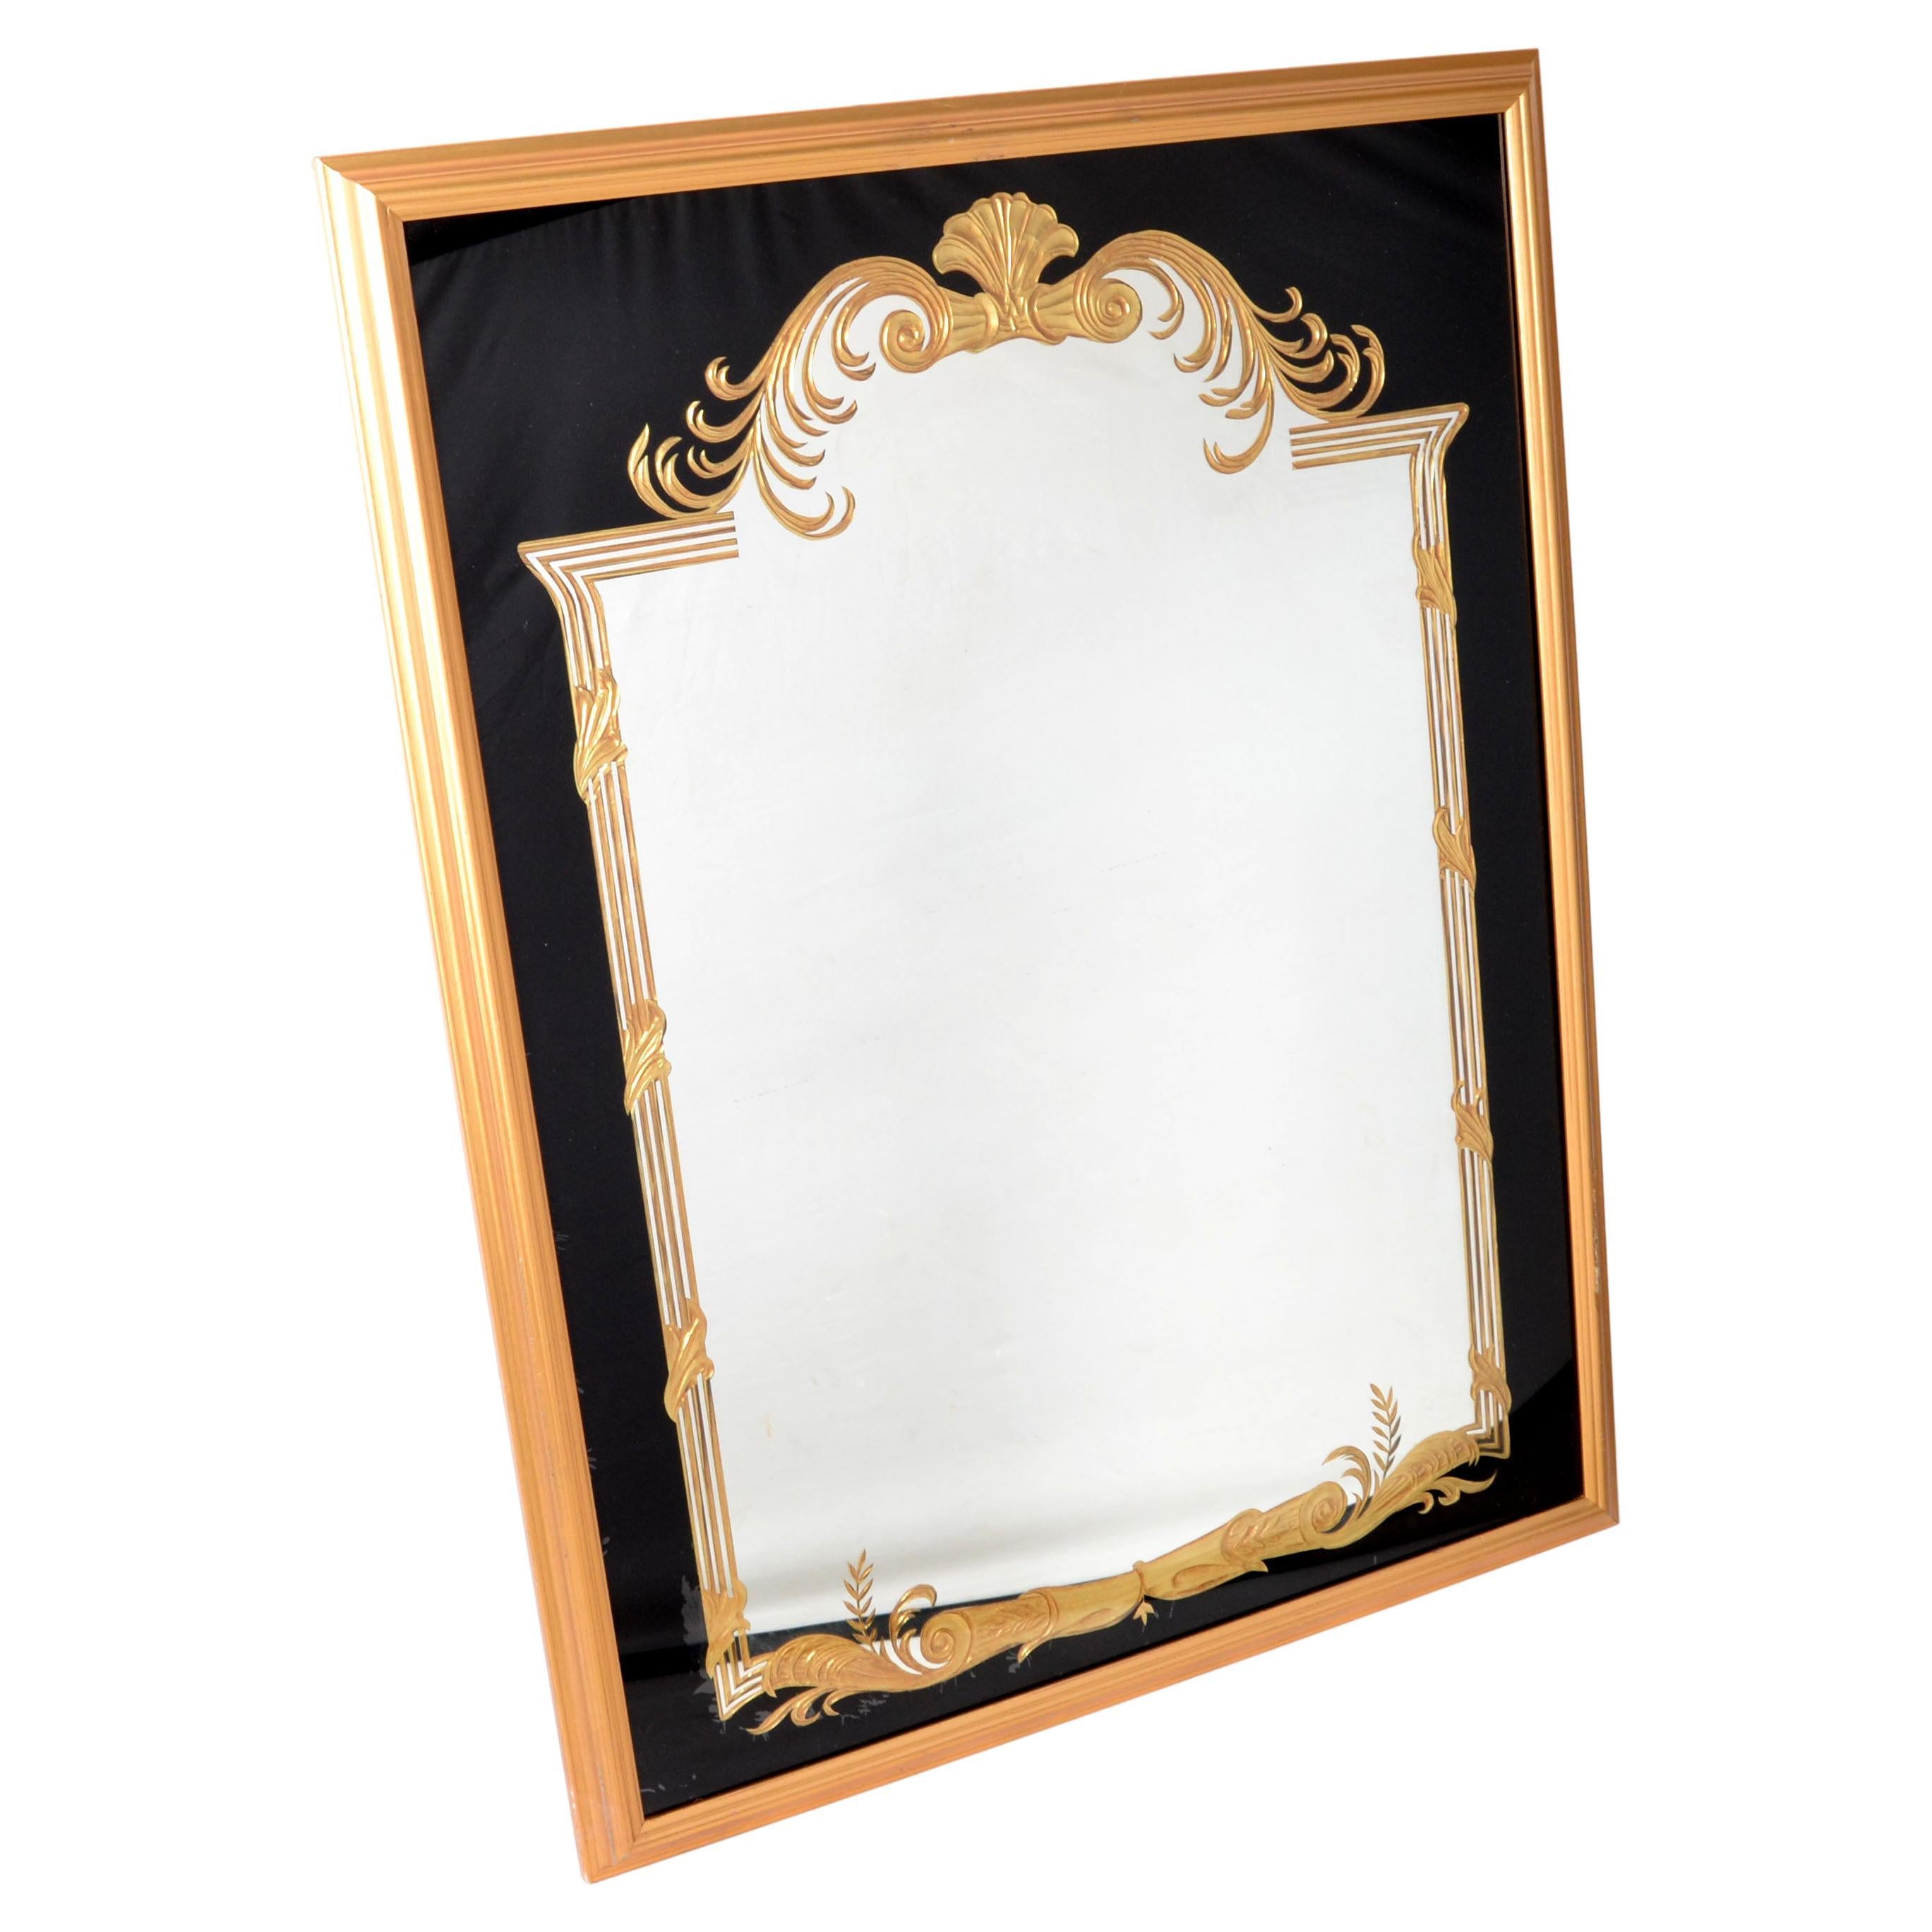 French style Gold Encrusted Etching gilt wall mirror hand carved gilt decoration.
This mirror is in original vintage condition.
Mirror Size: 25 x 31 inches.